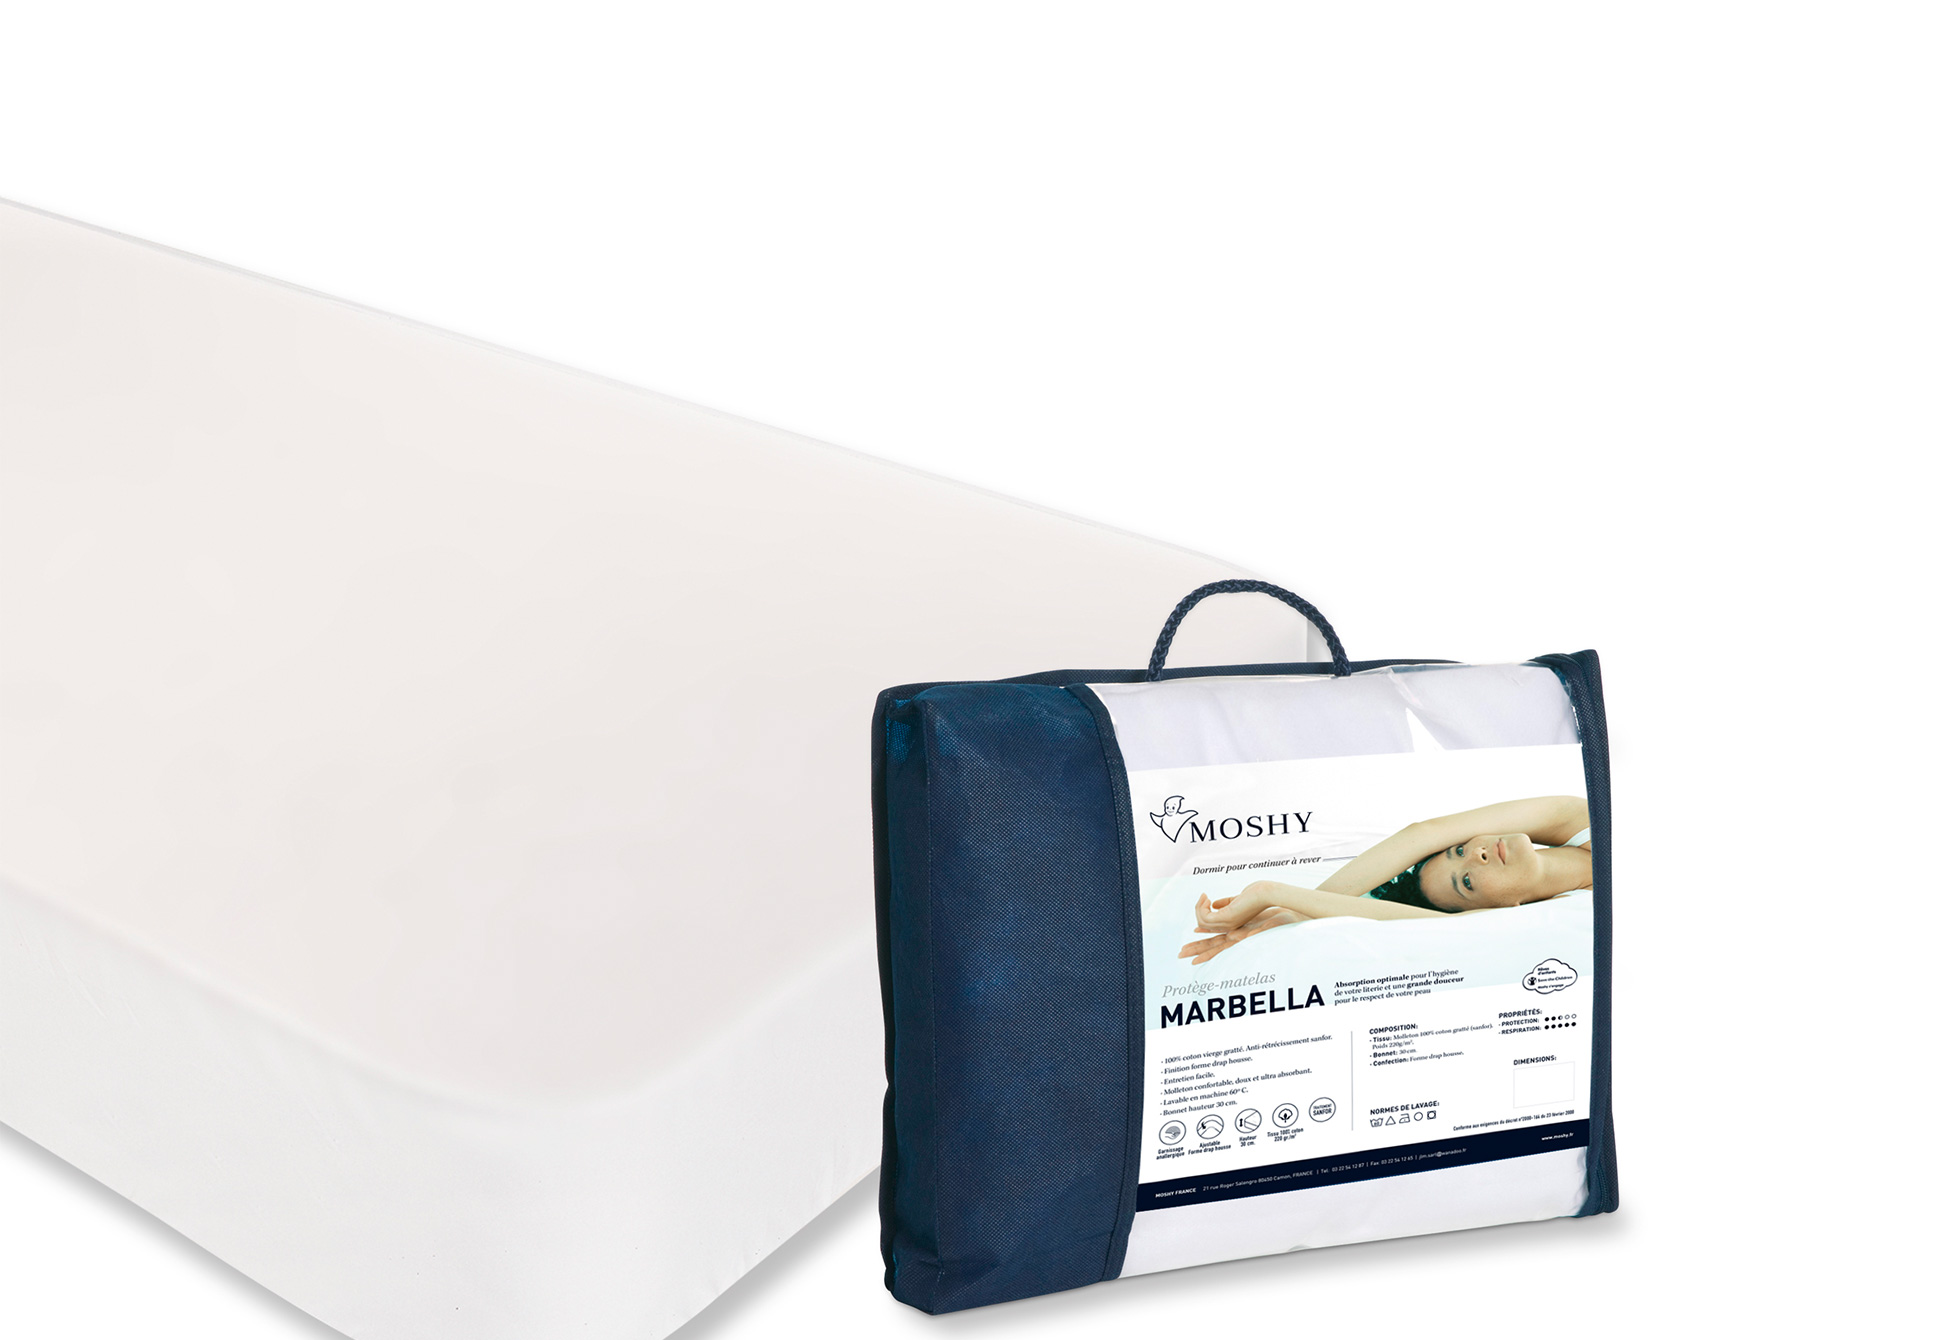 Protège matelas Moshy PROTECTION MARBELLA  160x200 (Queen size)